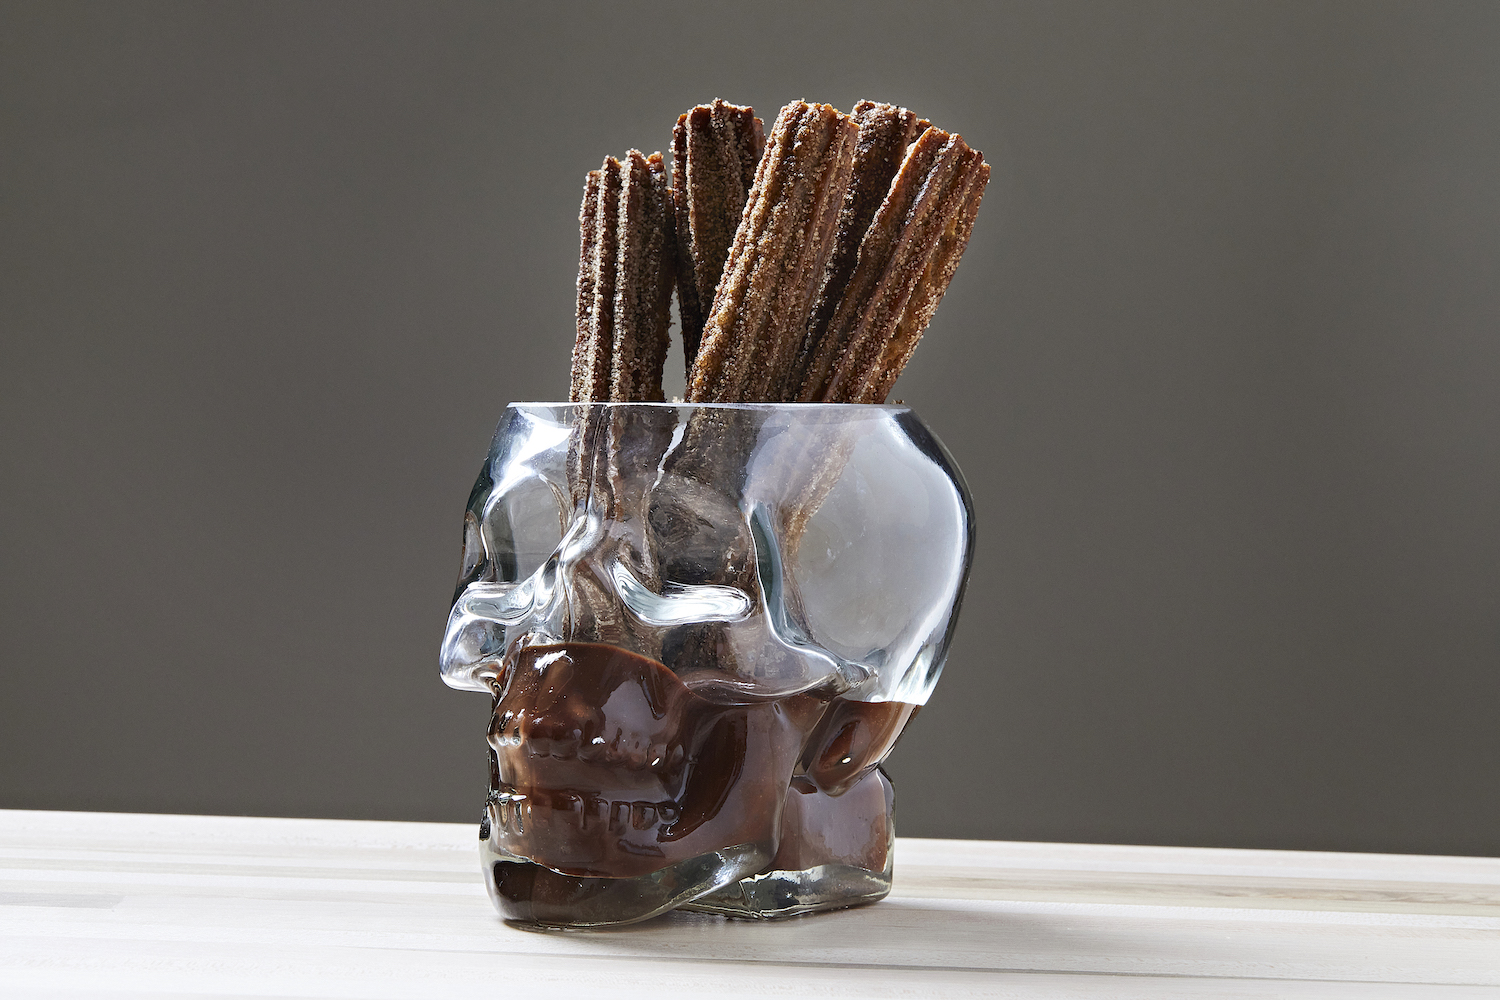 Churros in a skull-shaped glass full of chocolate.